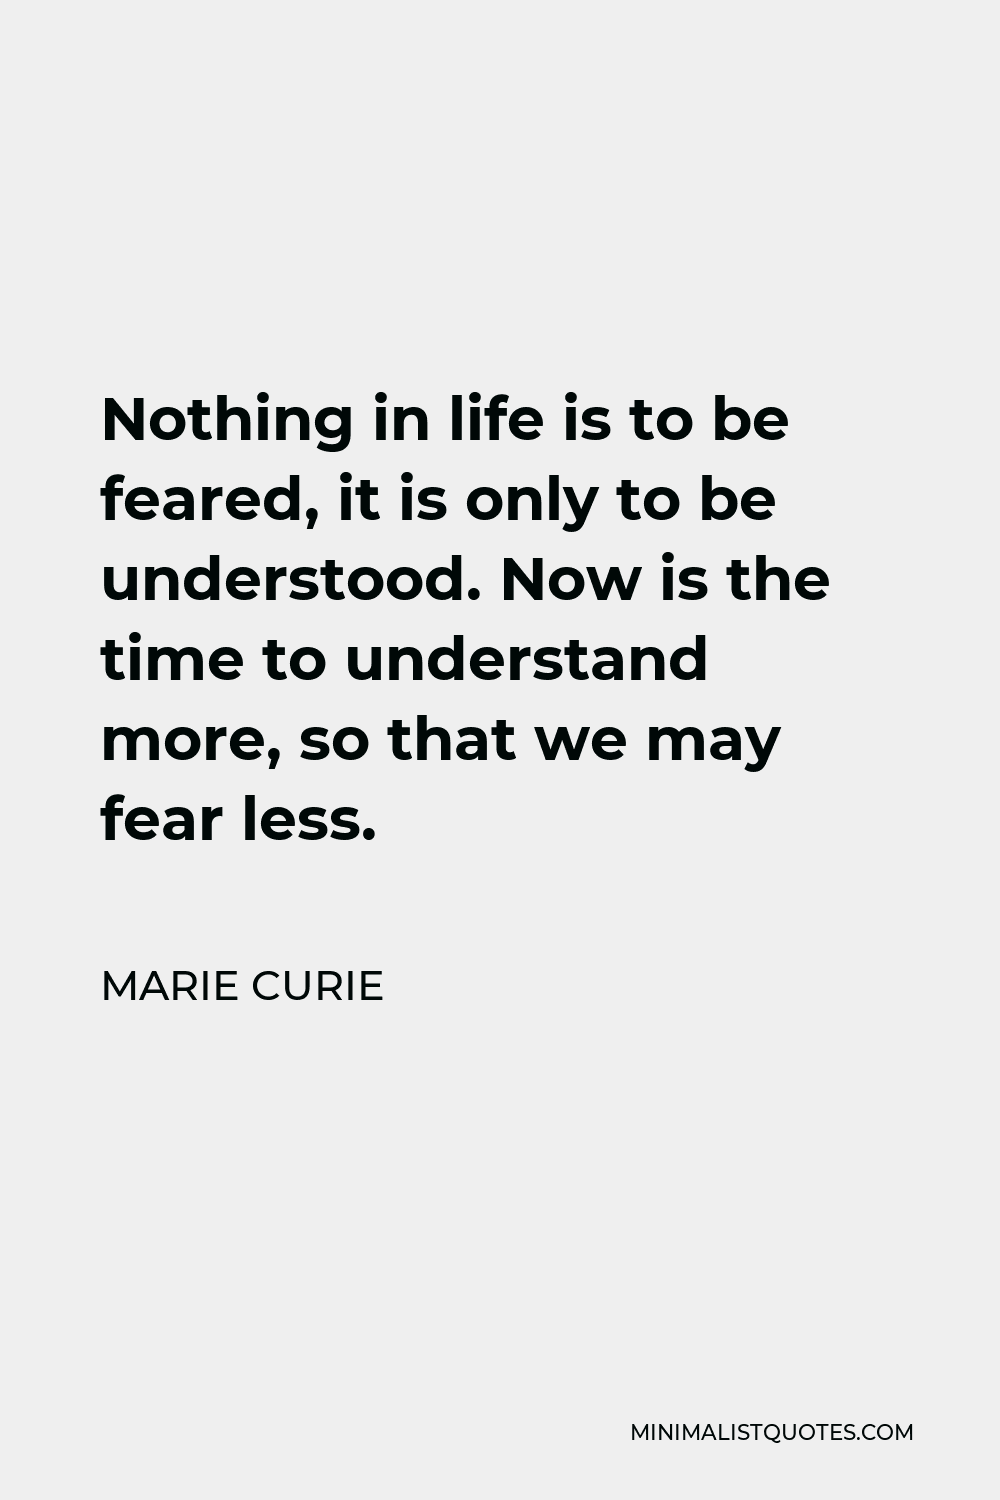 Marie Curie Quote - Nothing in life is to be feared, it is only to be understood. Now is the time to understand more, so that we may fear less.